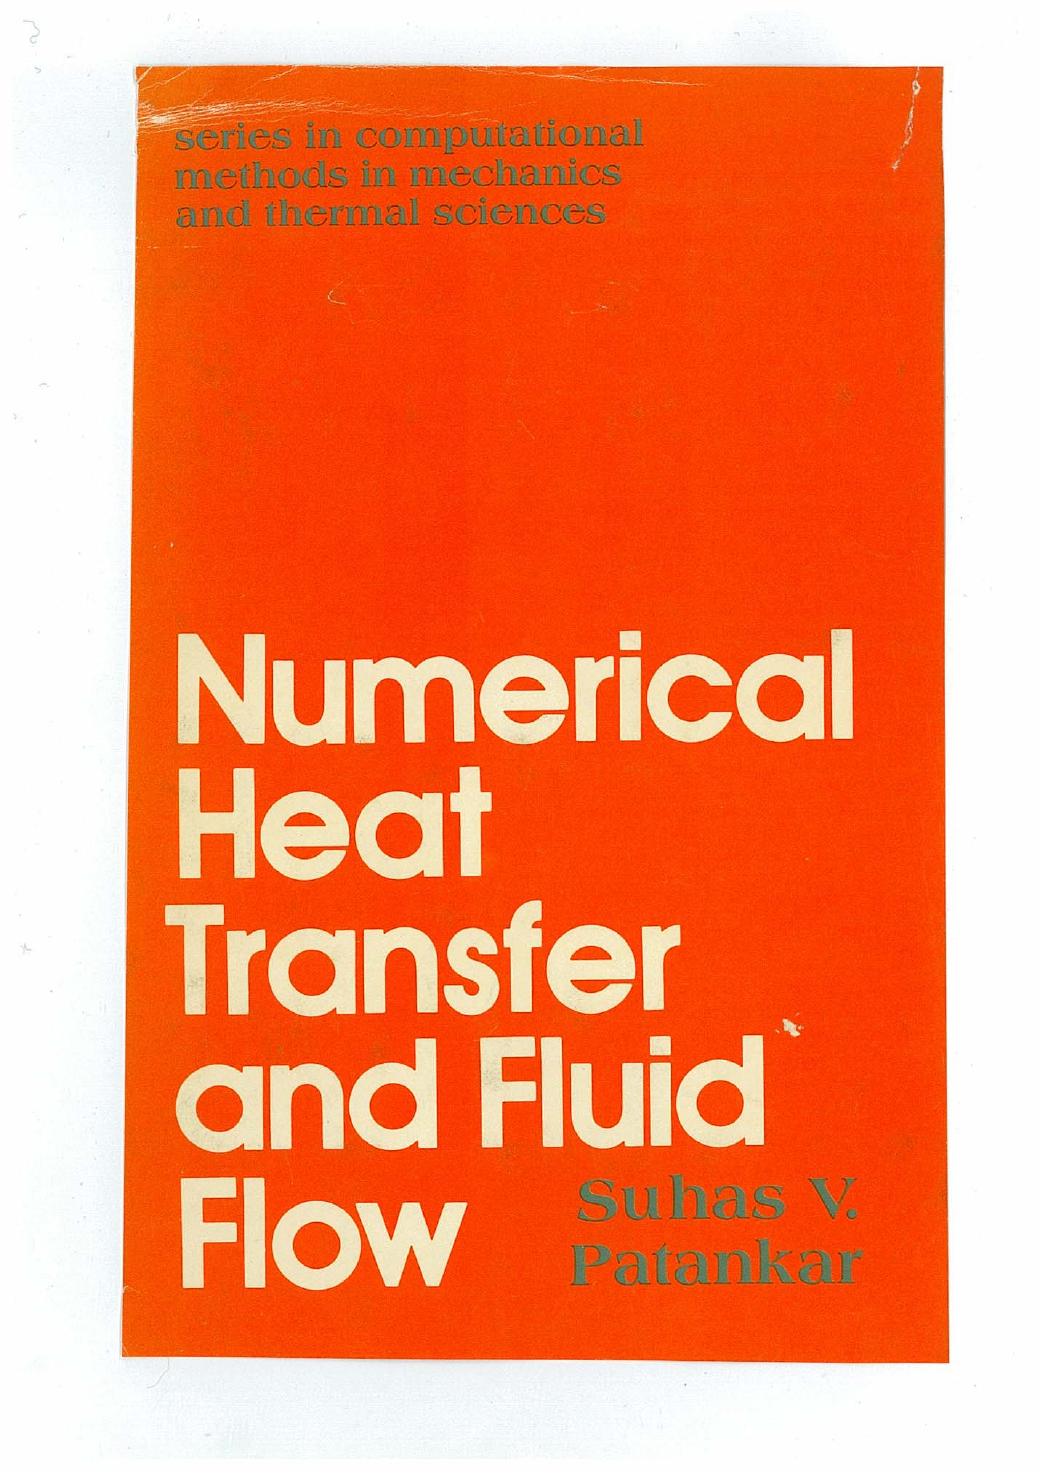 Numerical Heat Transfer and Fluid Flow.tif